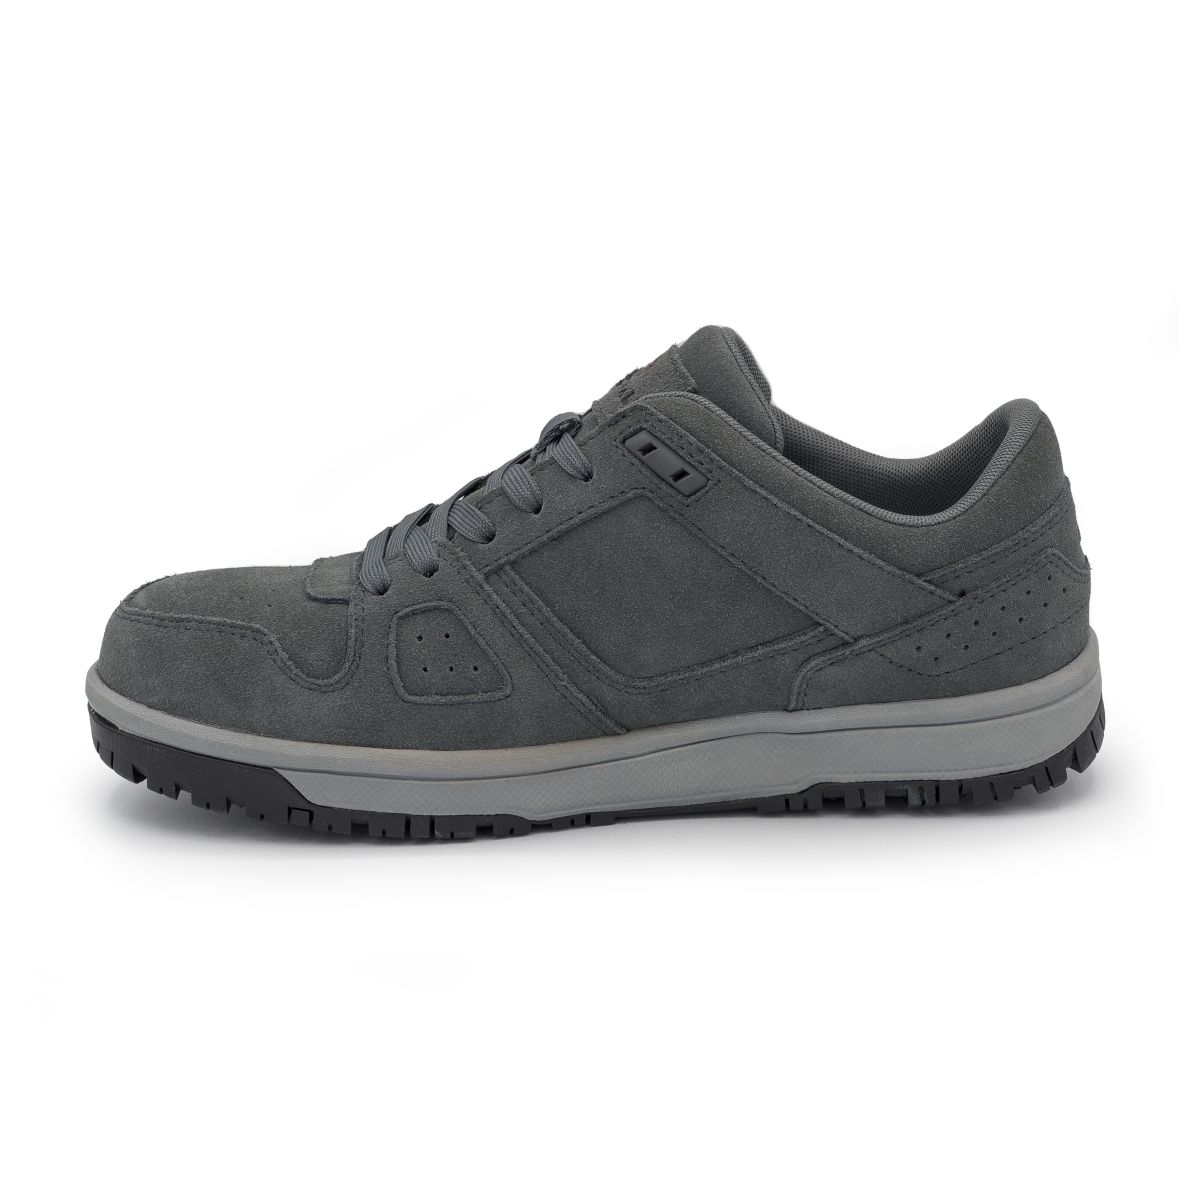 AIRWALK SAFETY Men's Mongo Composite Toe EH Work Shoe Charcoal/Grey - AW6301 CHARCOAL/GRAY - CHARCOAL/GRAY, 11.5-W